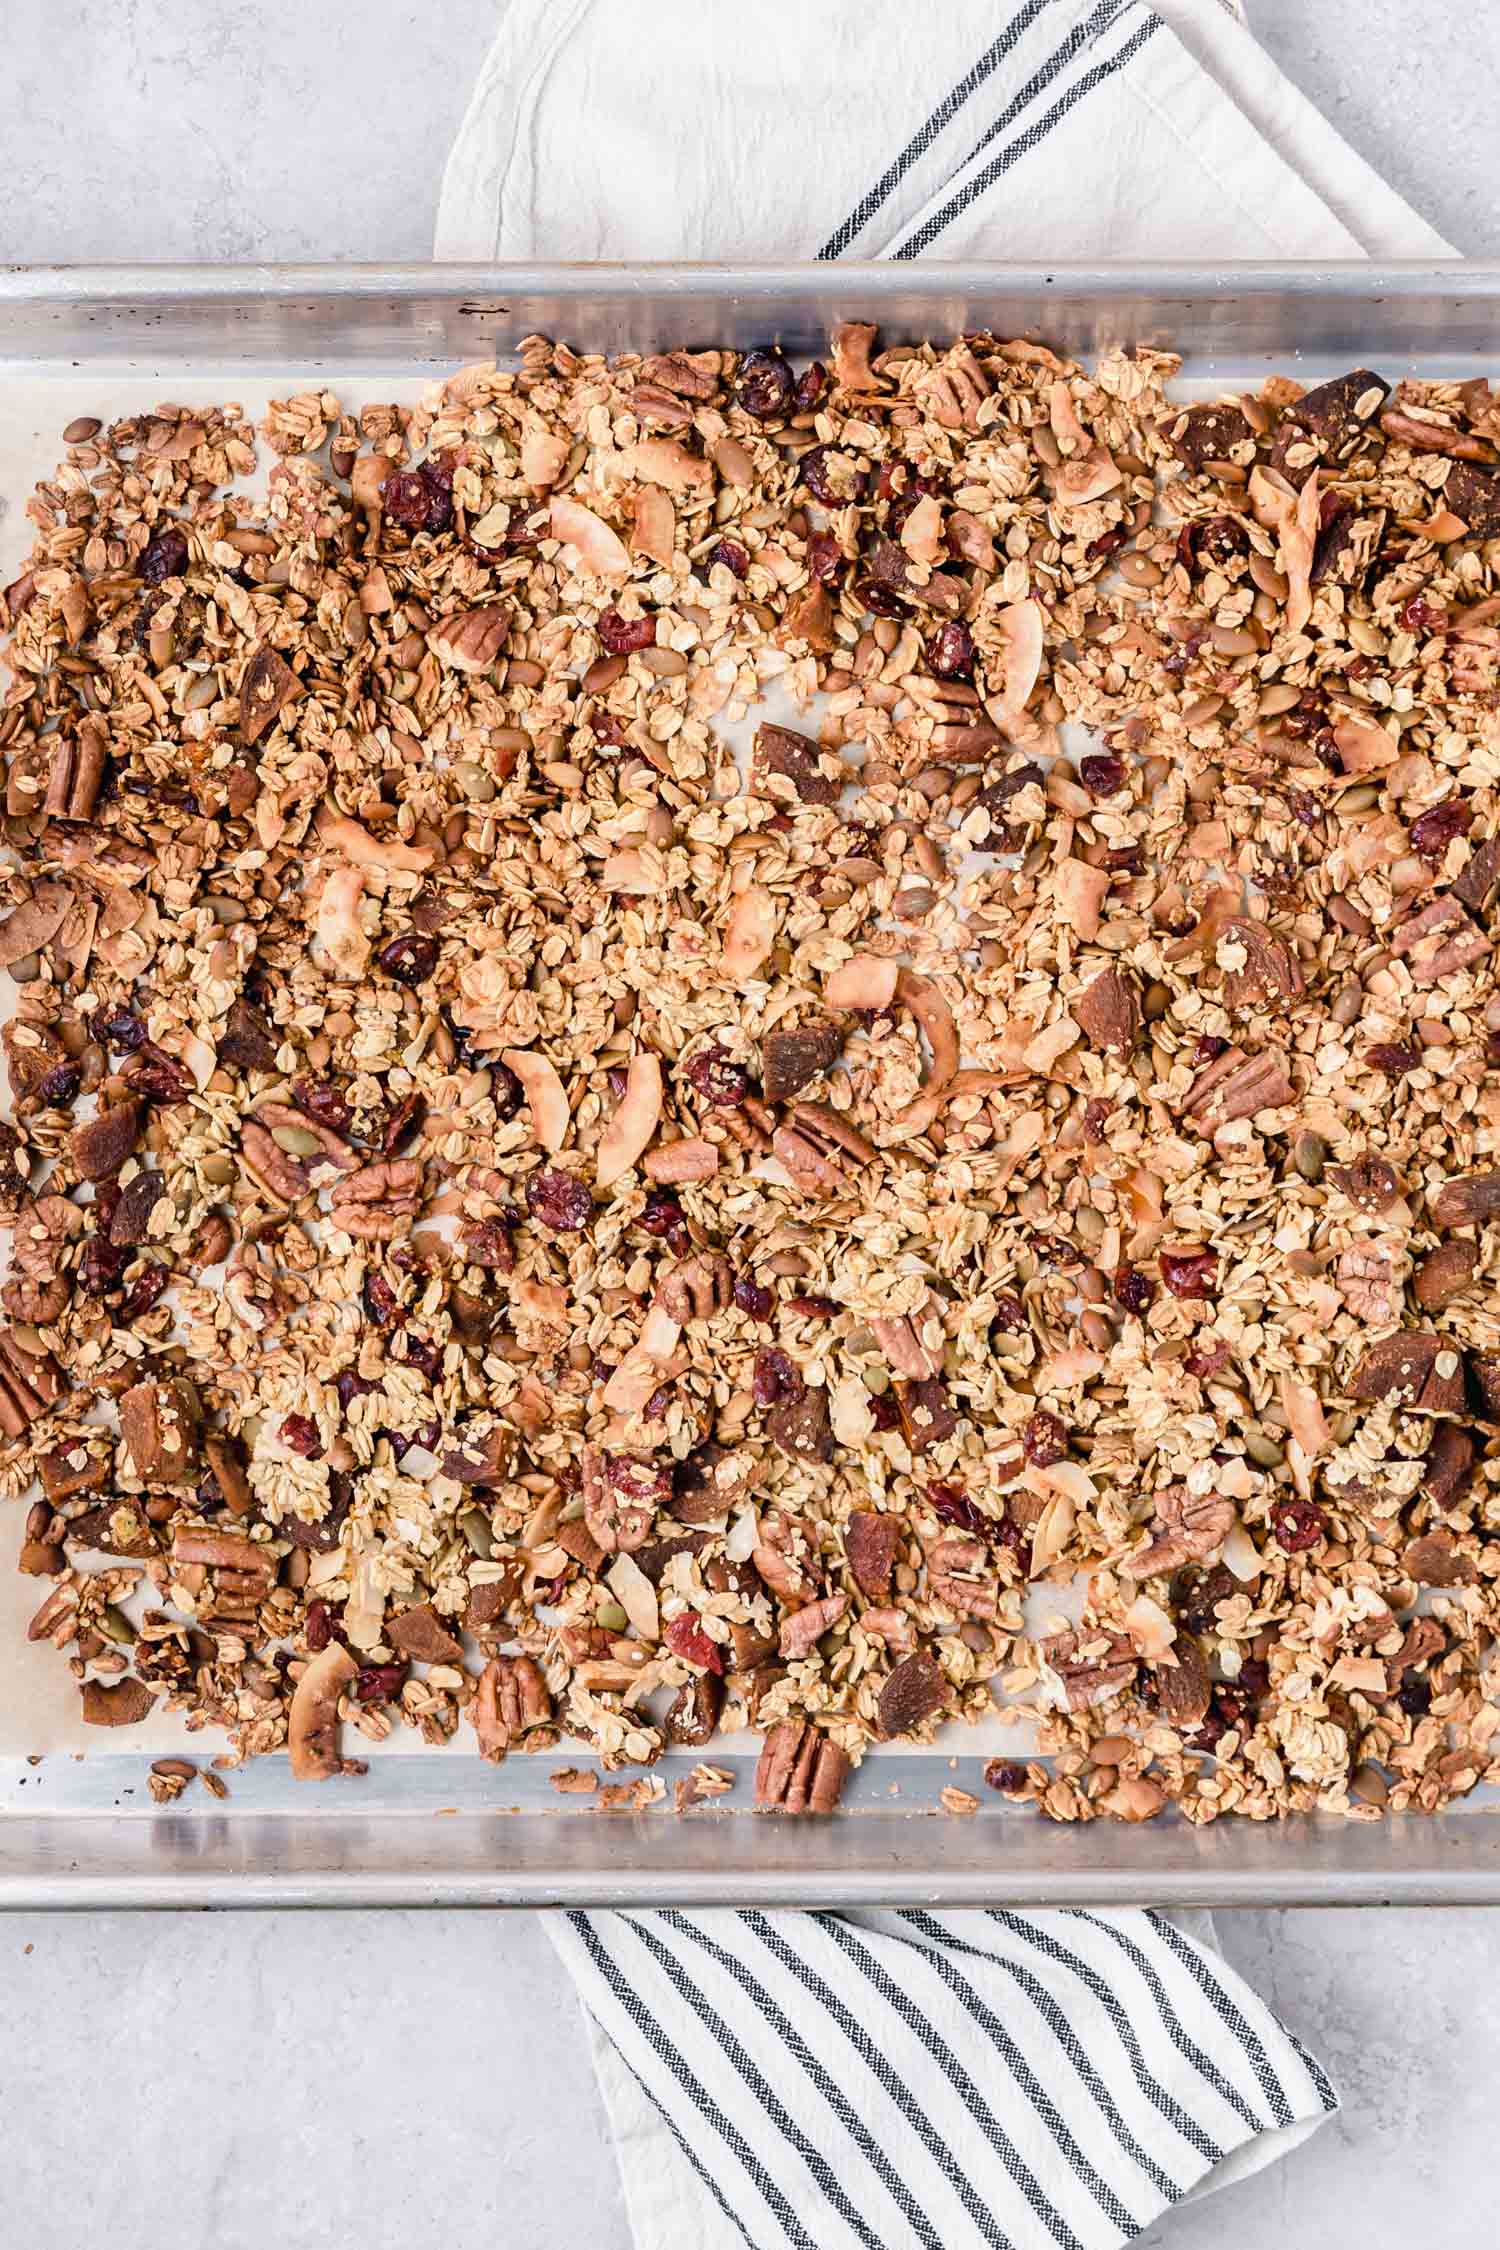 Easy Orange Pecan Power Granola is an easy recipe to make and loaded with goodies. #vegangranola #orangepecan #pecangranola #homemadegranola #recipe #veganrecipe #breakfastrecipe #plantbased